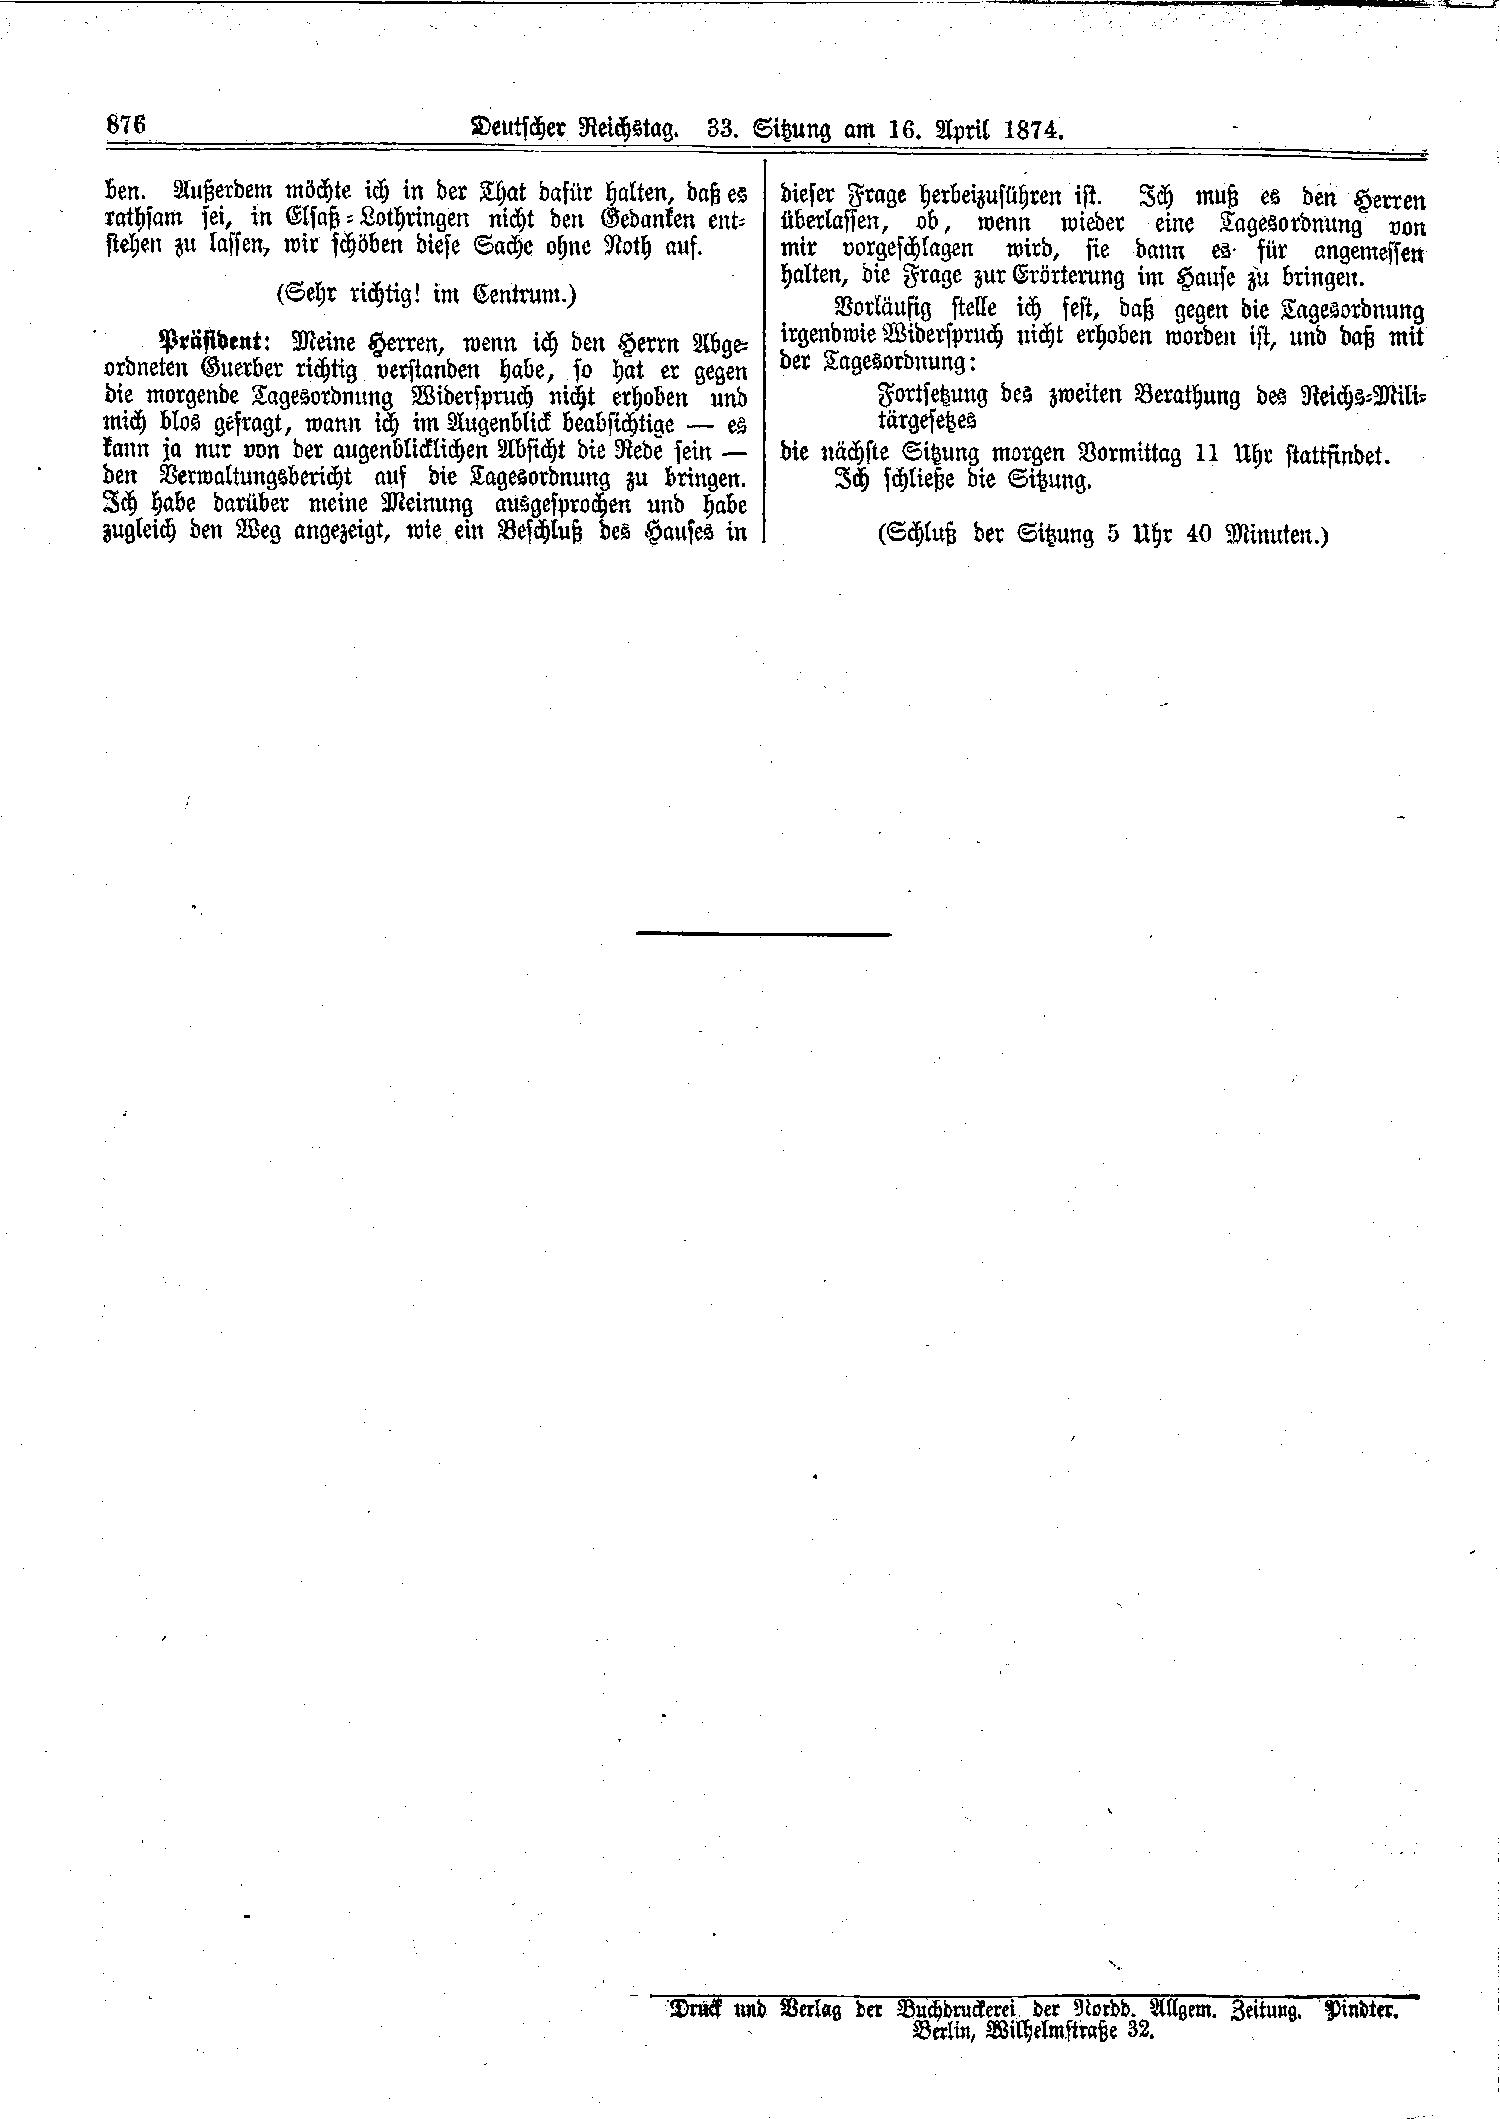 Scan of page 876